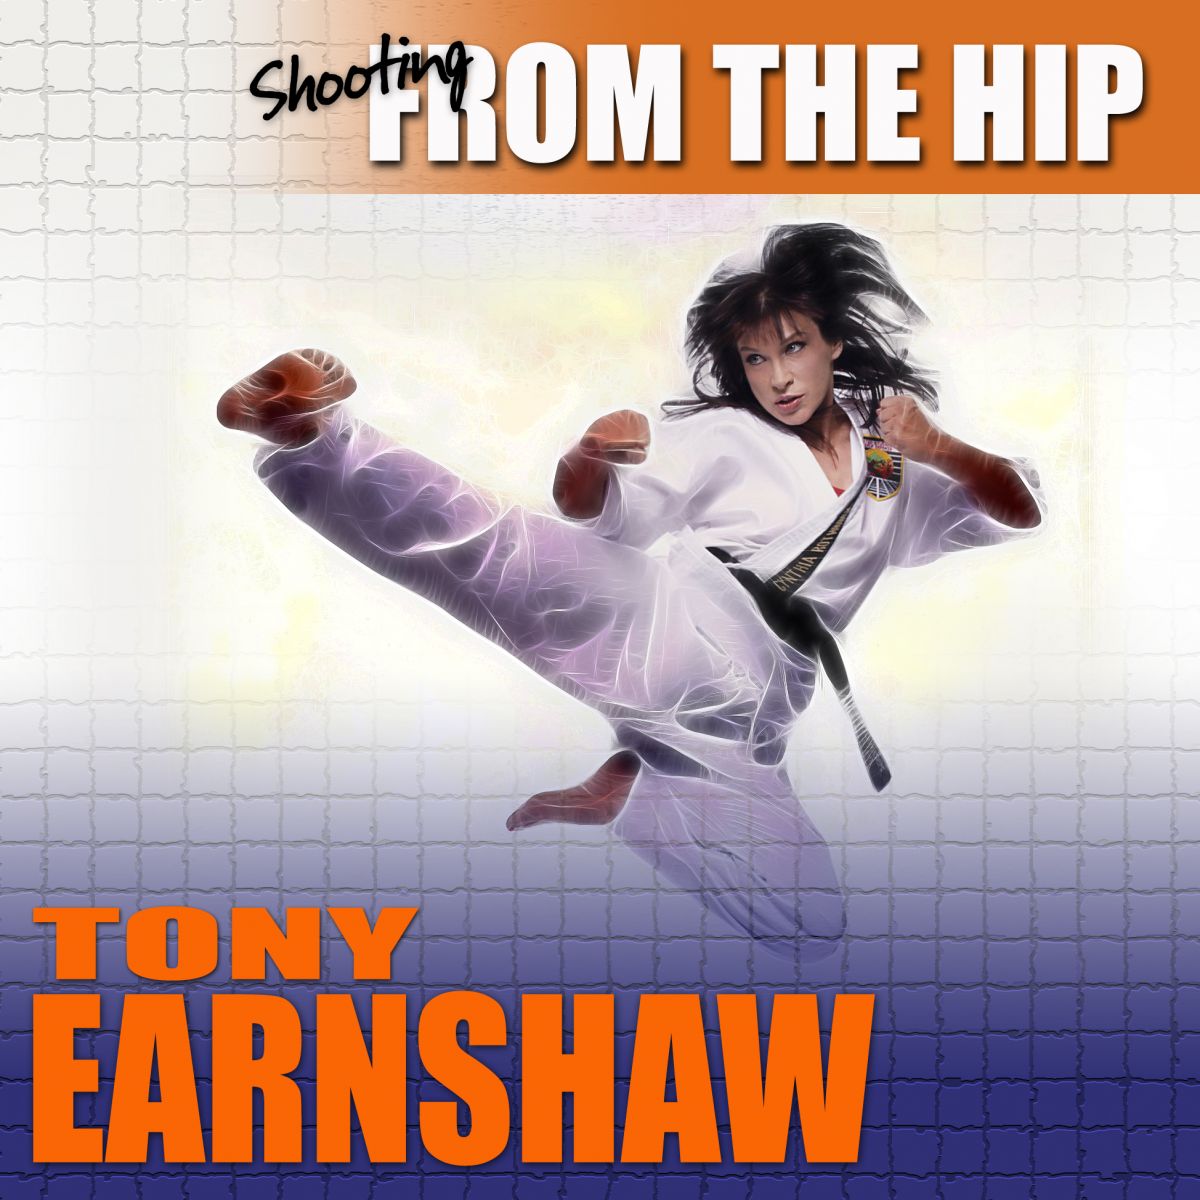 Shooting from the Hip - Cynthia Rothrock